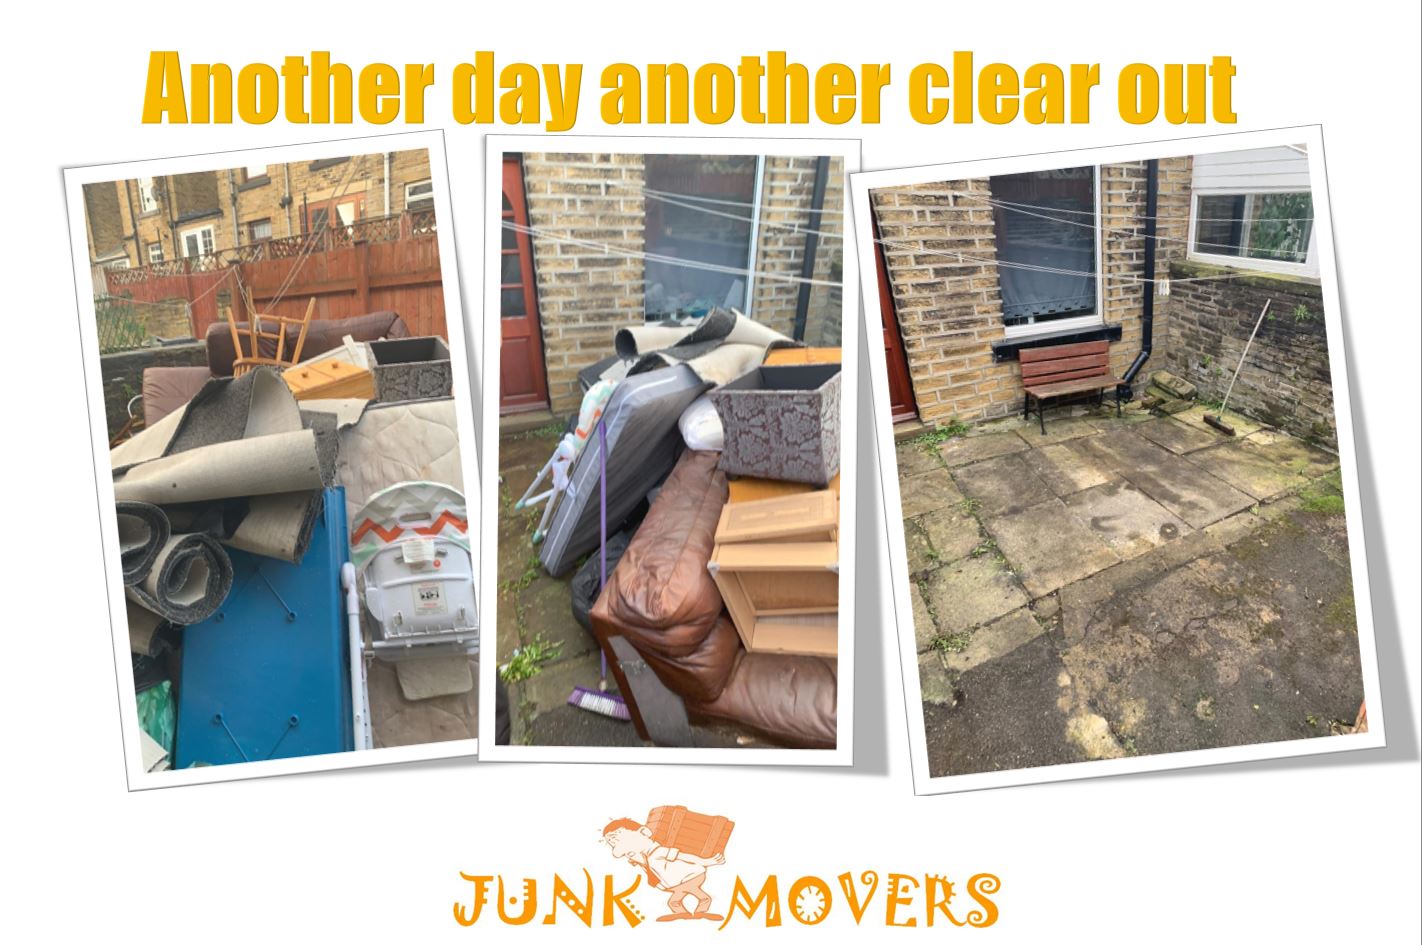 Junk Collections Dewsbury, Junk Movers West Yorkshire Ltd